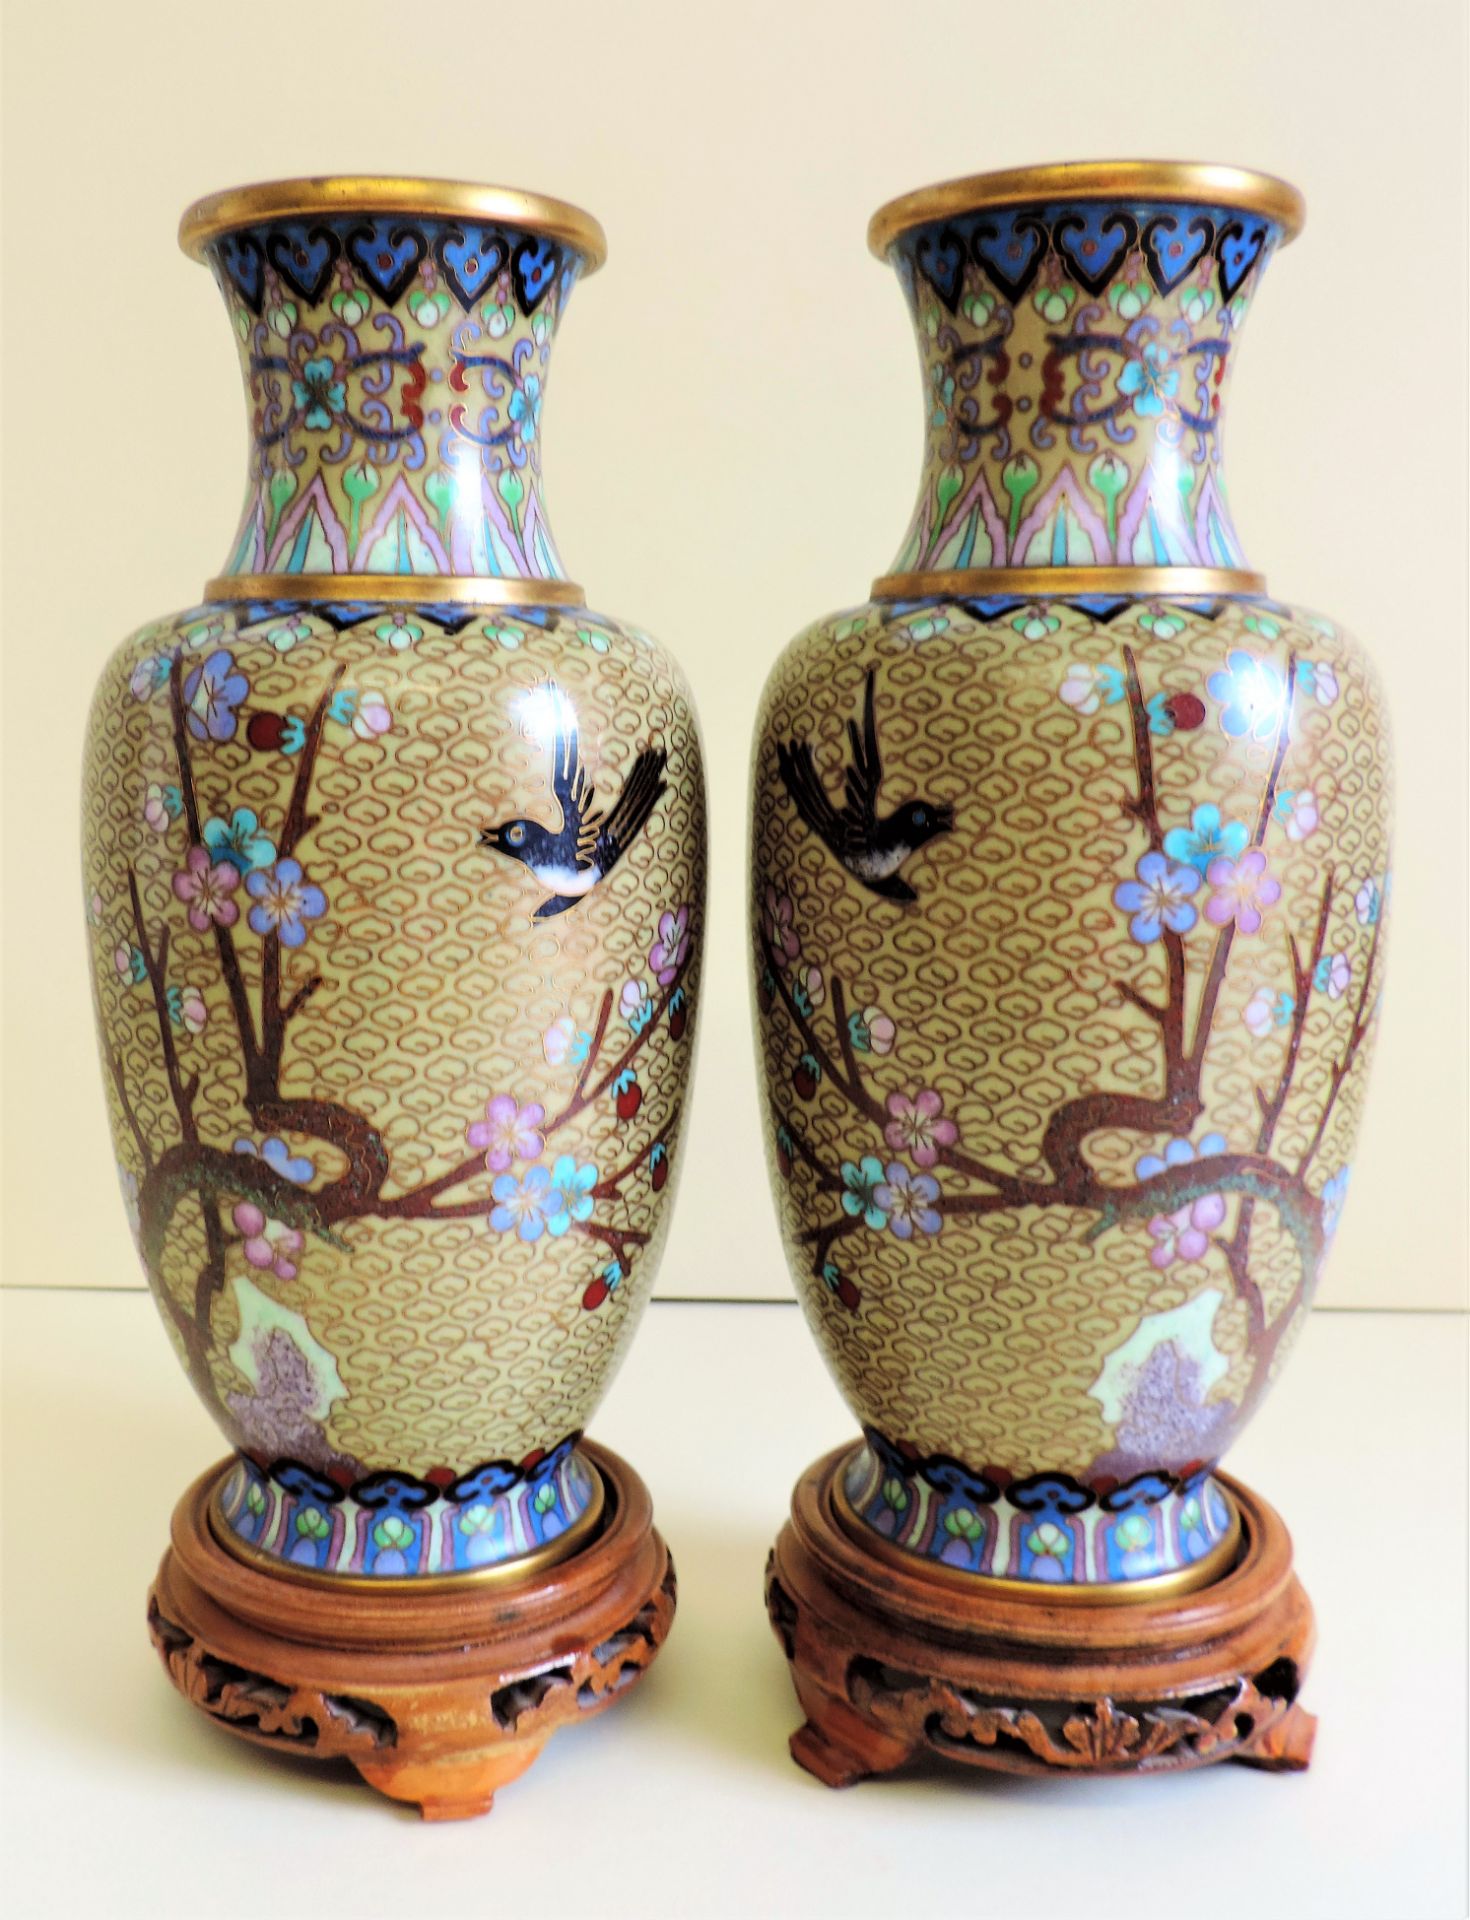 Pair Chinese Cloisonne Vases with Birds & Blossom Decoration 24cm Tall - Image 3 of 12